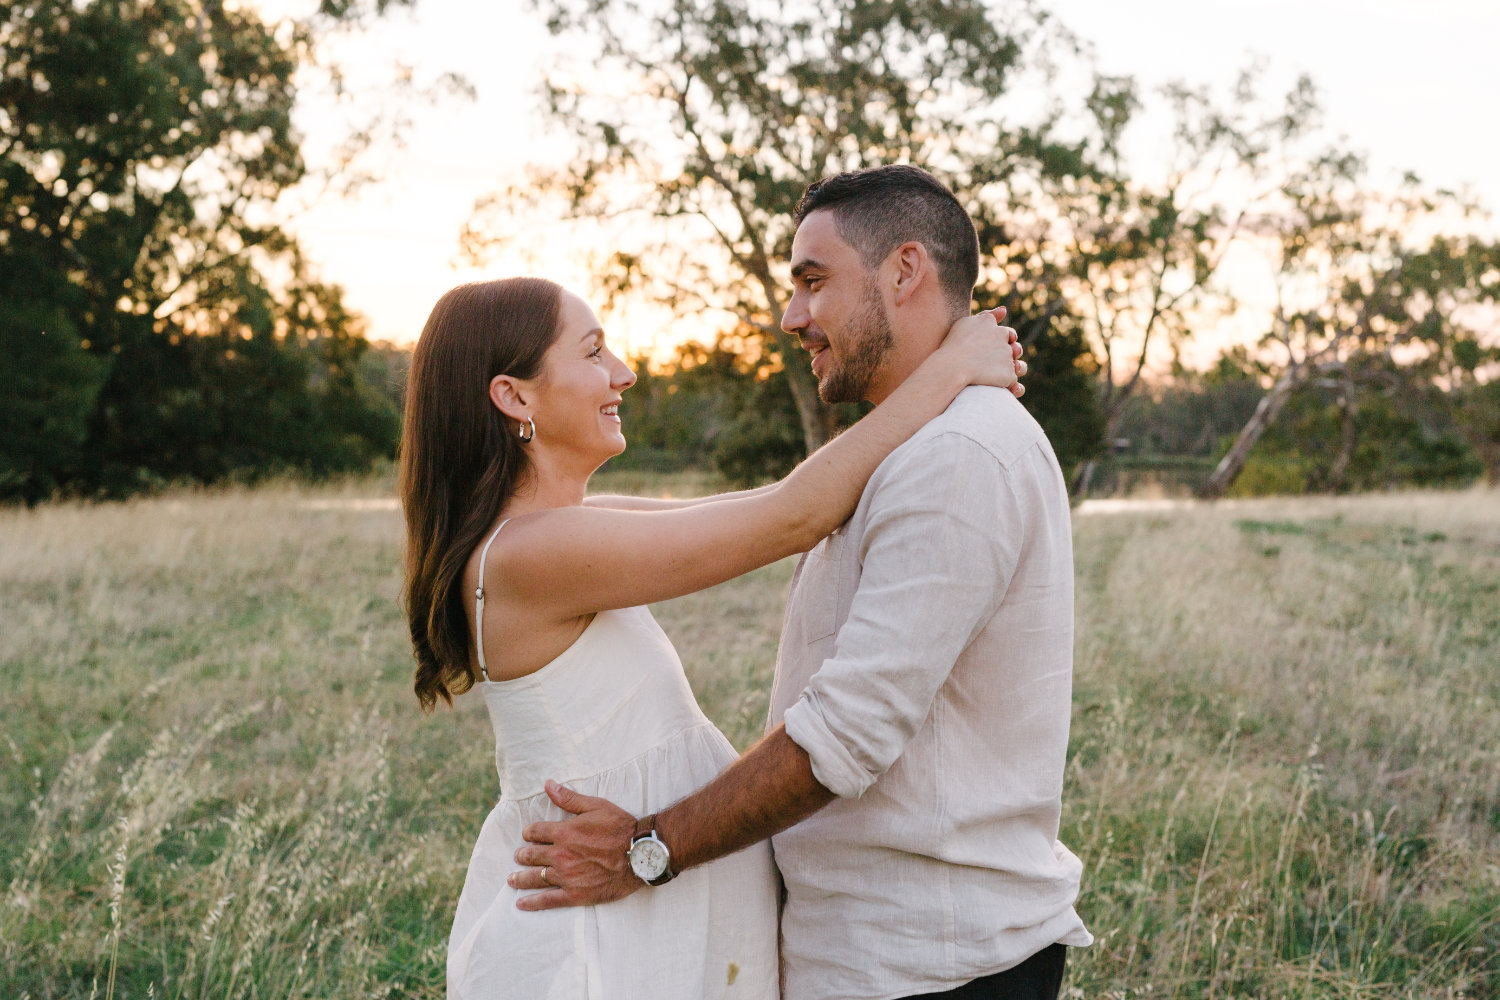 Moonee Ponds Outdoor Maternity Photoshoot Melbourne Ascot Vale Madeleine Chiller Photography Yvette and Mark 10